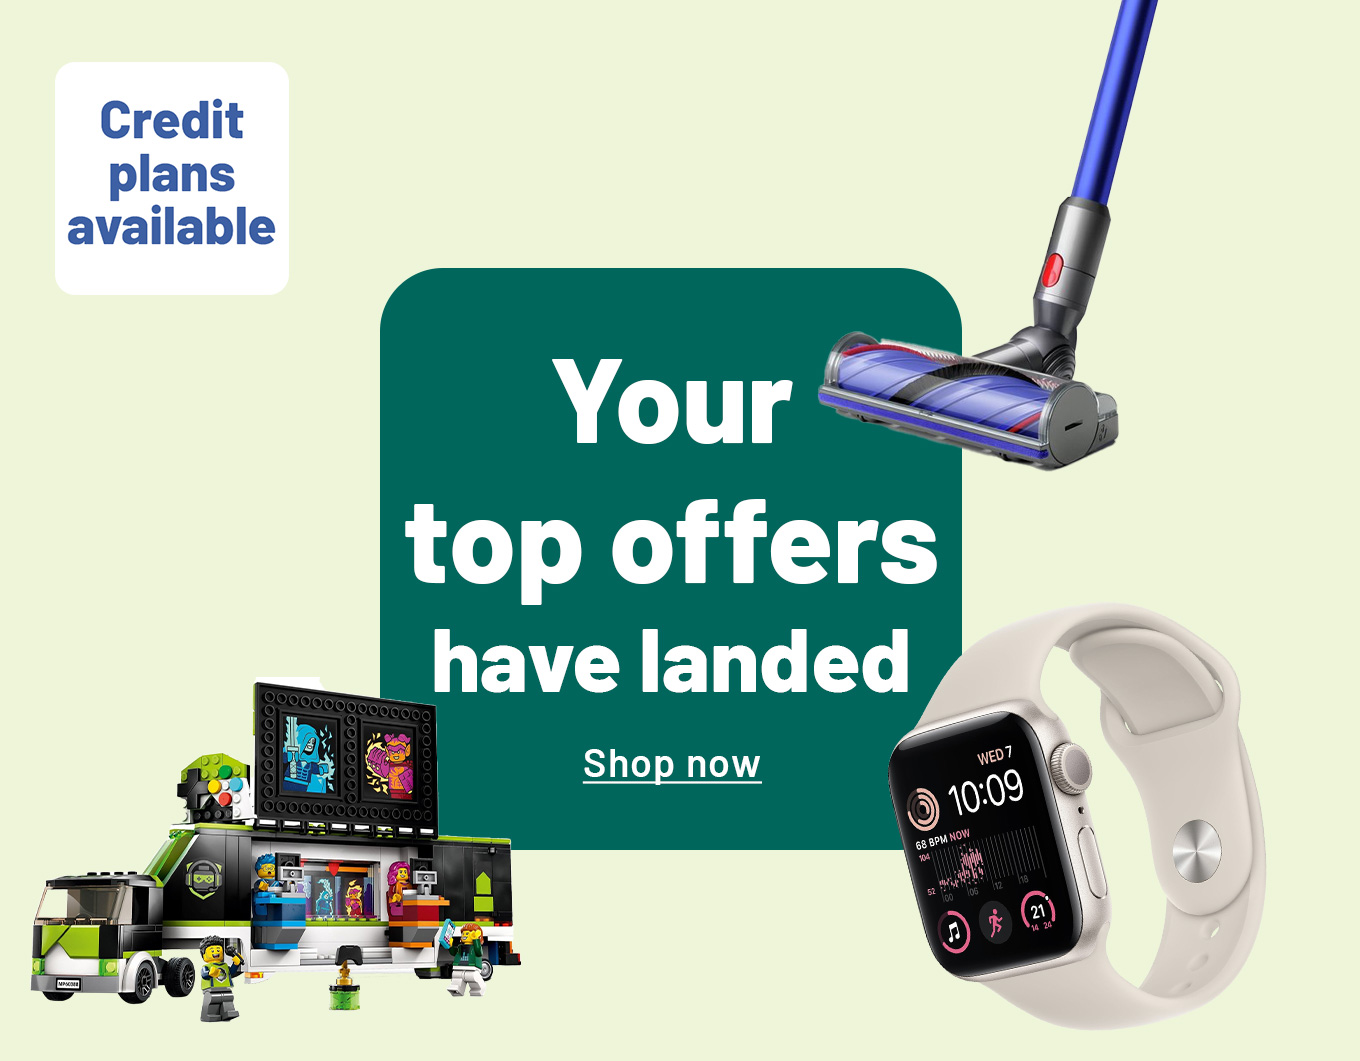 Your latest offers have landed